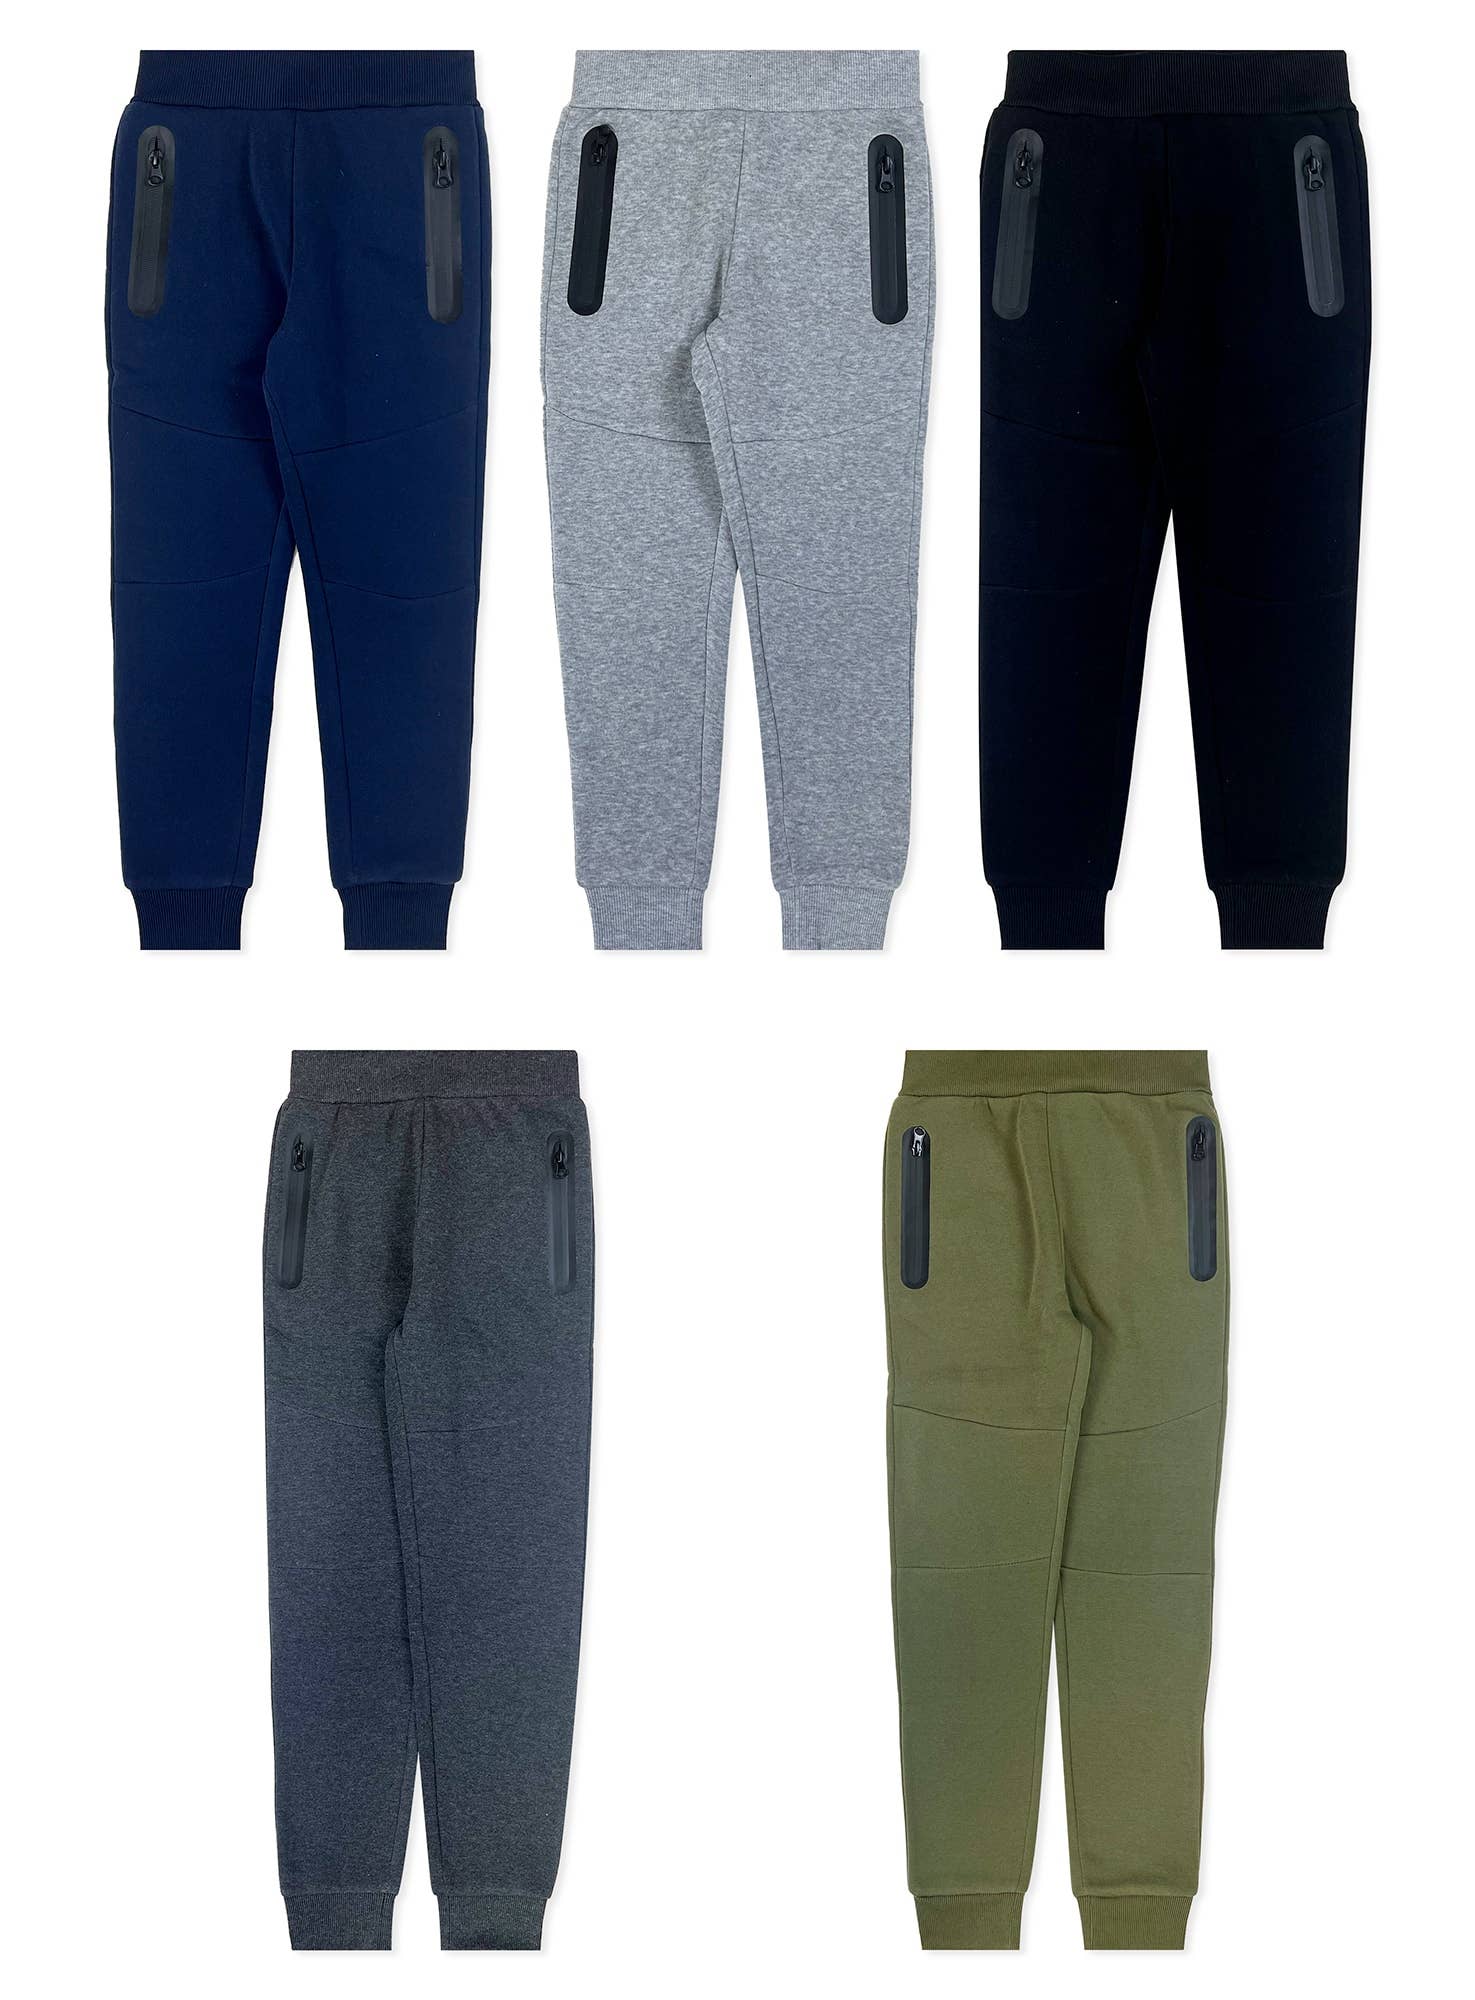 Wholesale Youth Fleece Jogger Sweatpants in Charcoal Grey